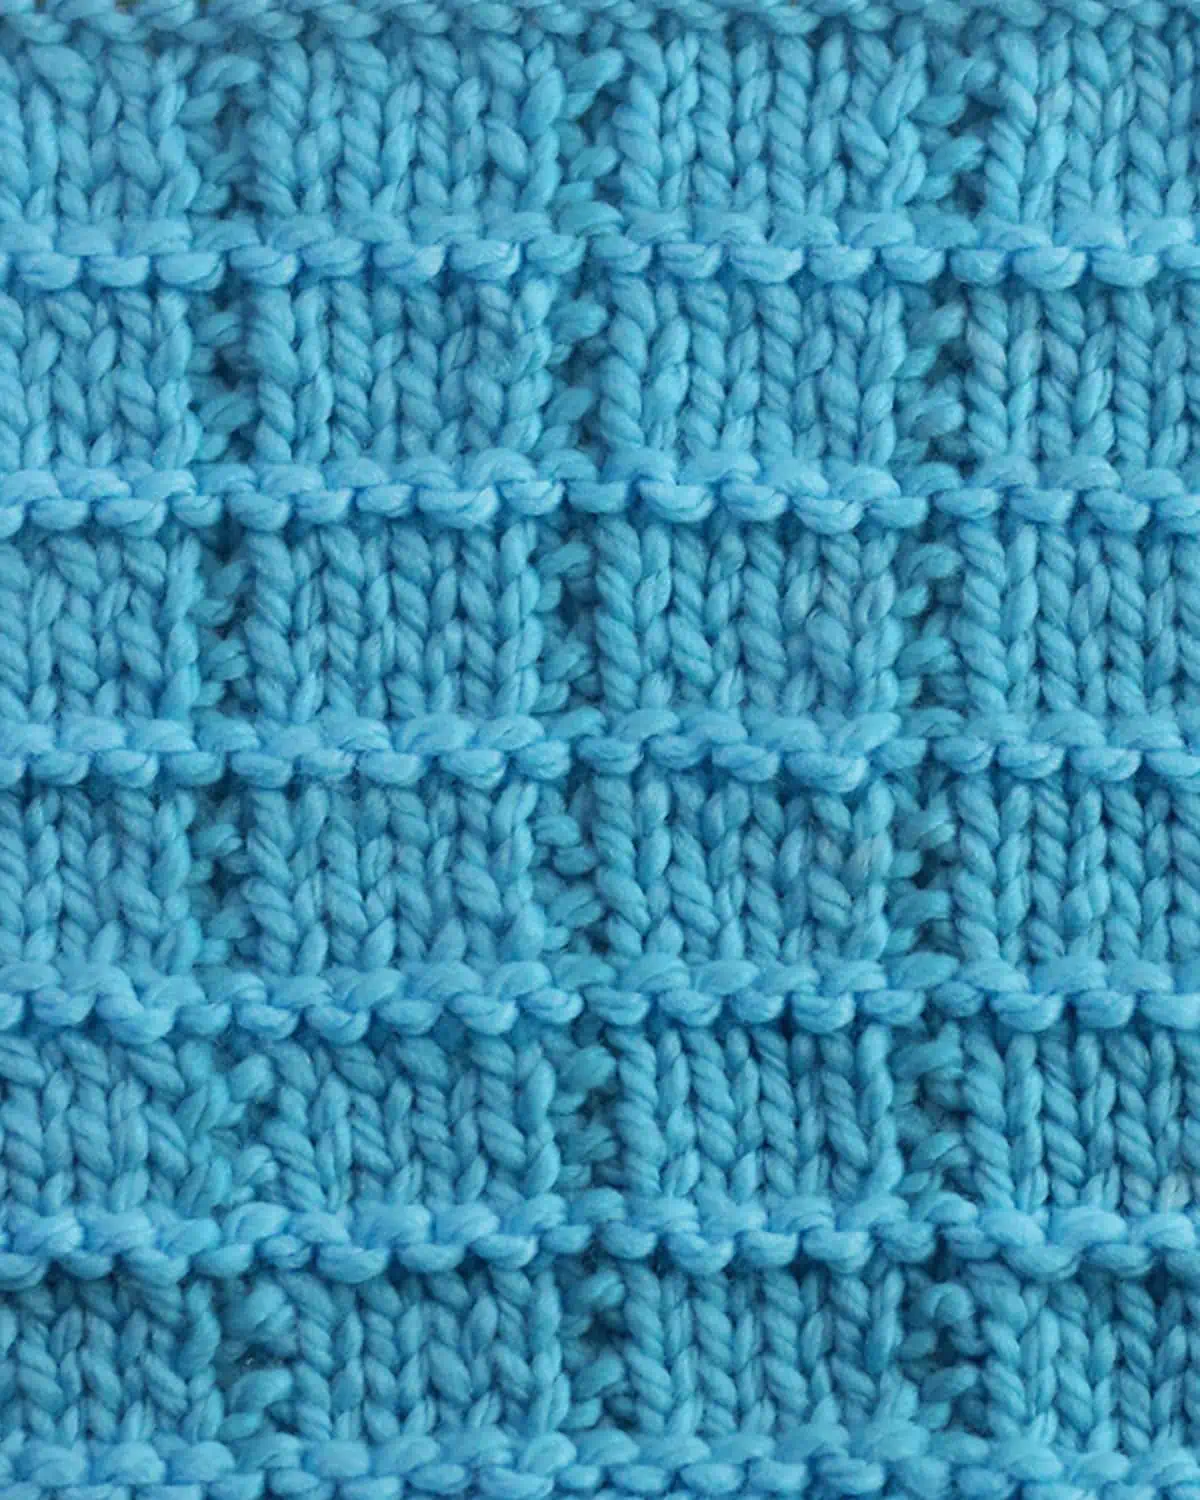 Tile Square stitch texture knitted with blue colored yarn.